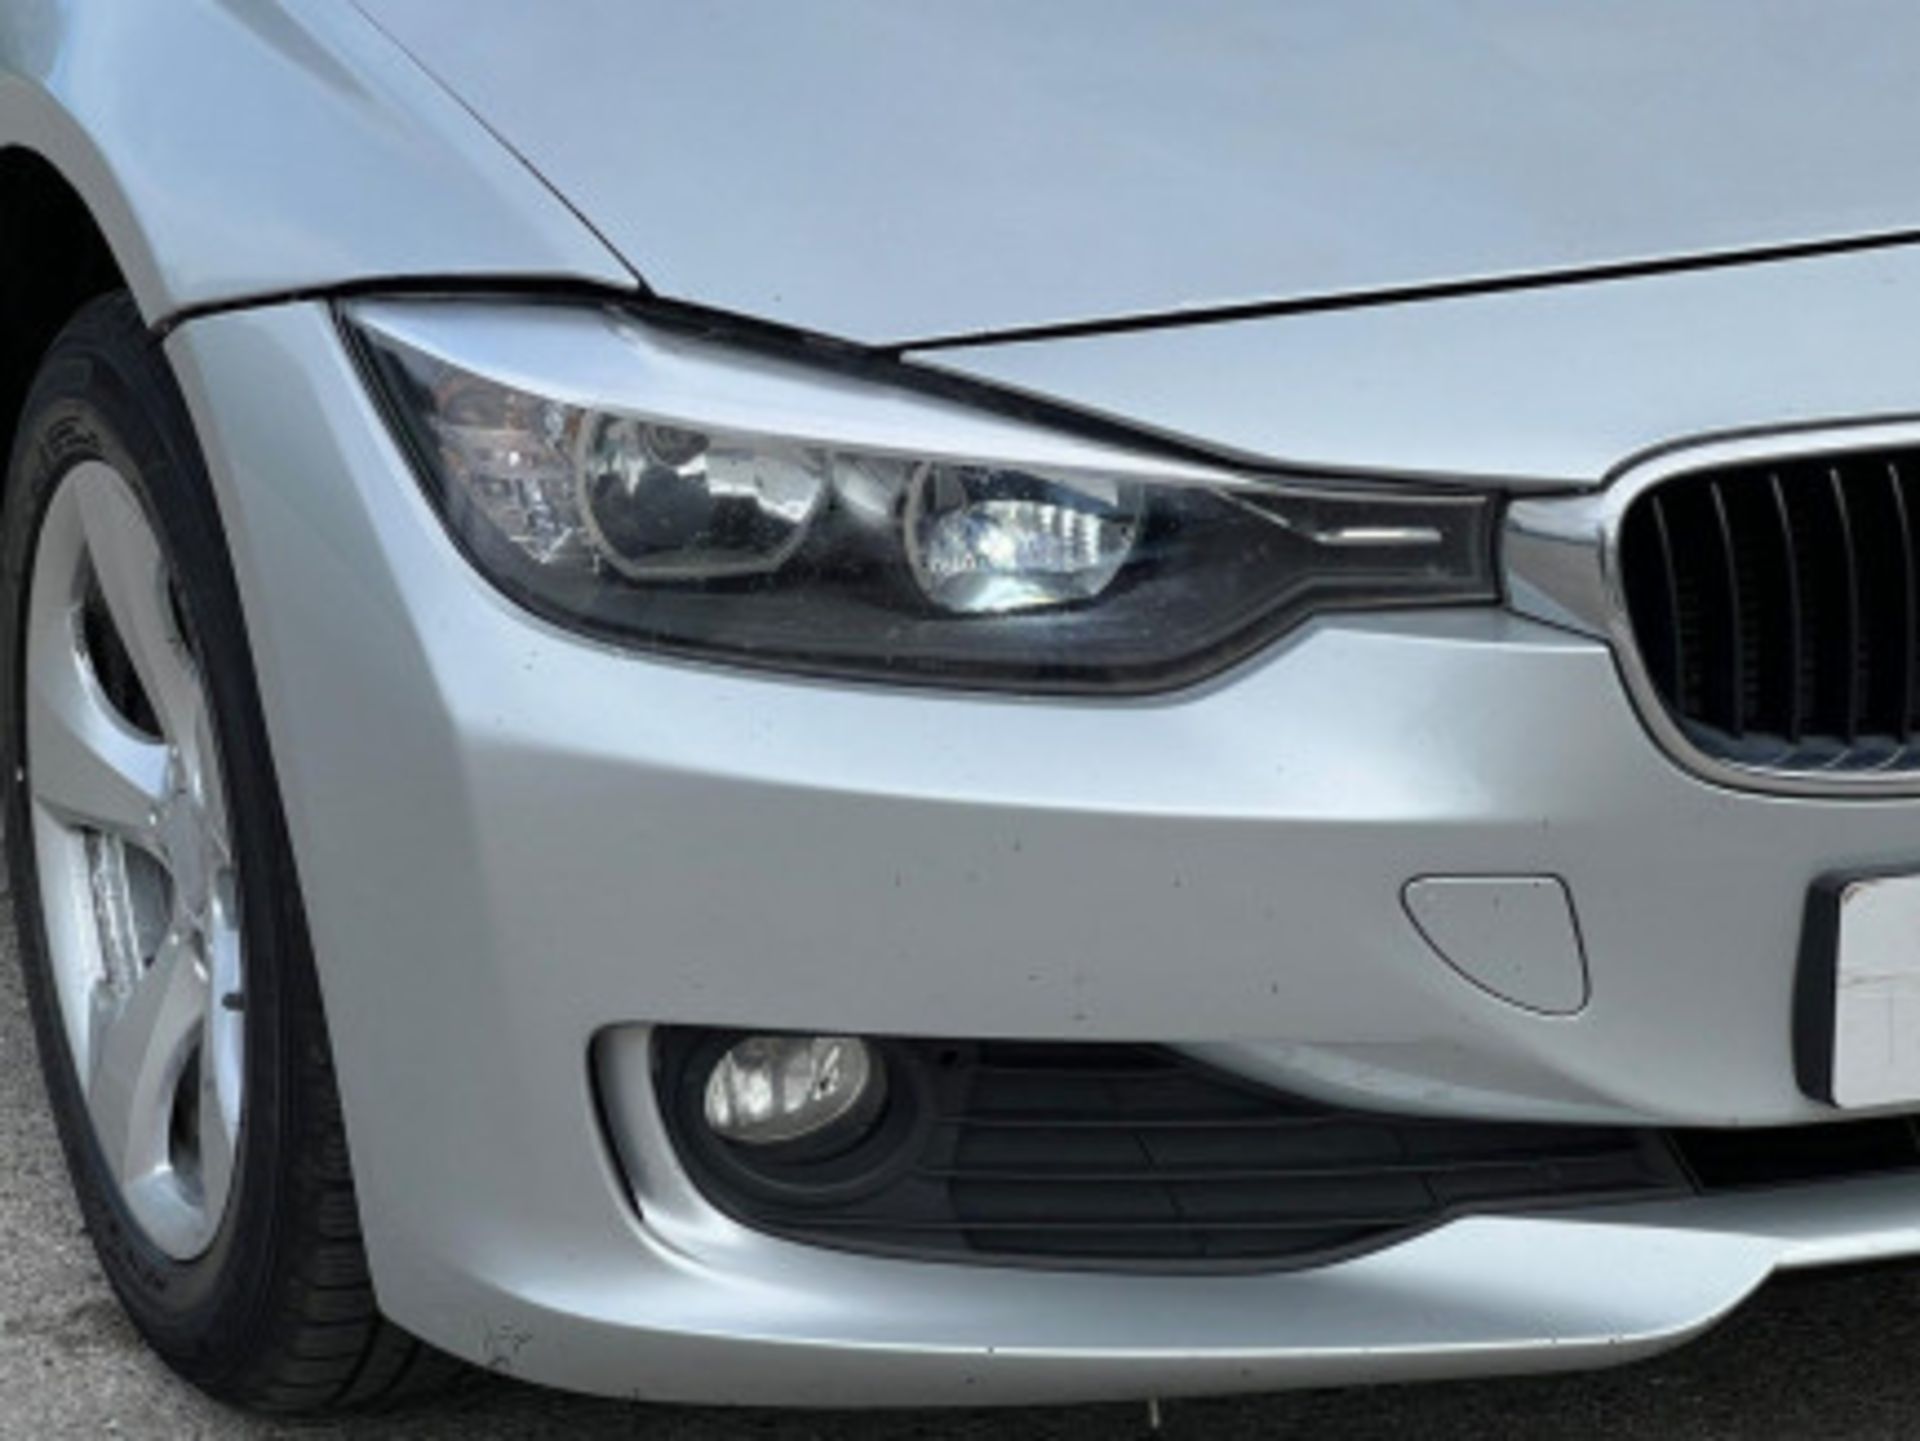 BMW 3 SERIES 2.0 DIESEL ED START STOP - A WELL-MAINTAINED GEM >>--NO VAT ON HAMMER--<< - Image 88 of 229